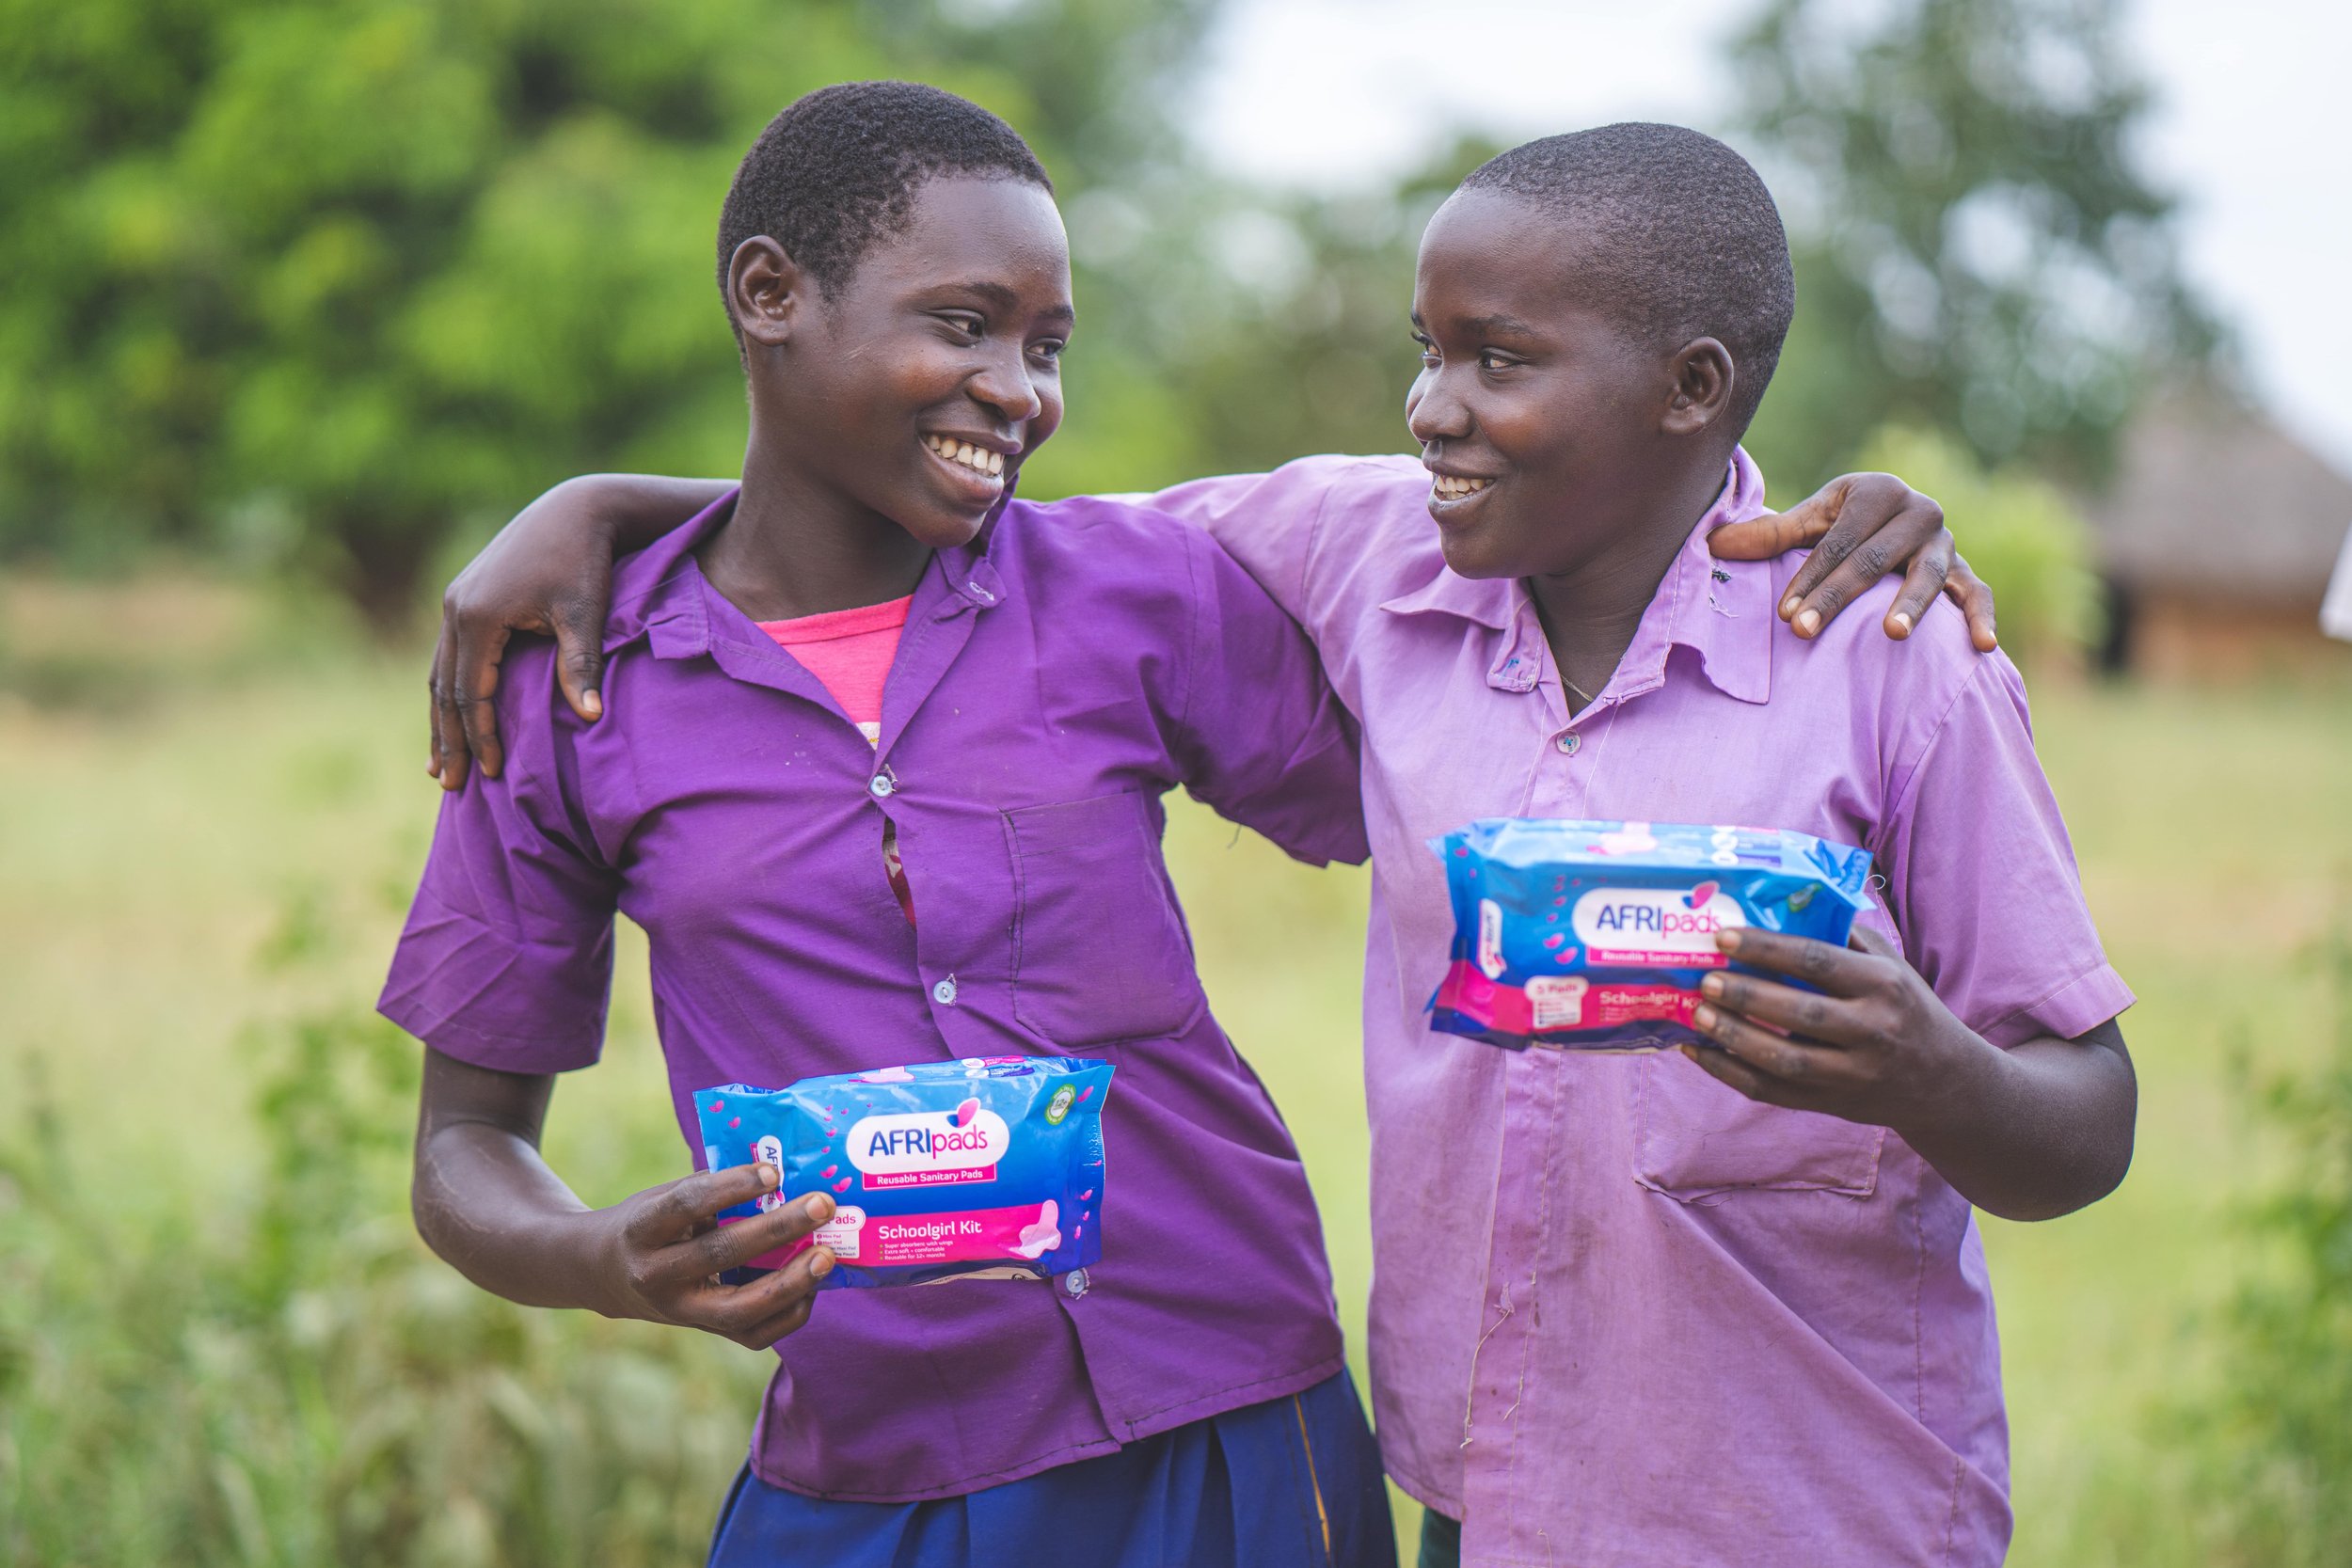 Eliminate Taxes on Sanitary Pads to Empower Girls